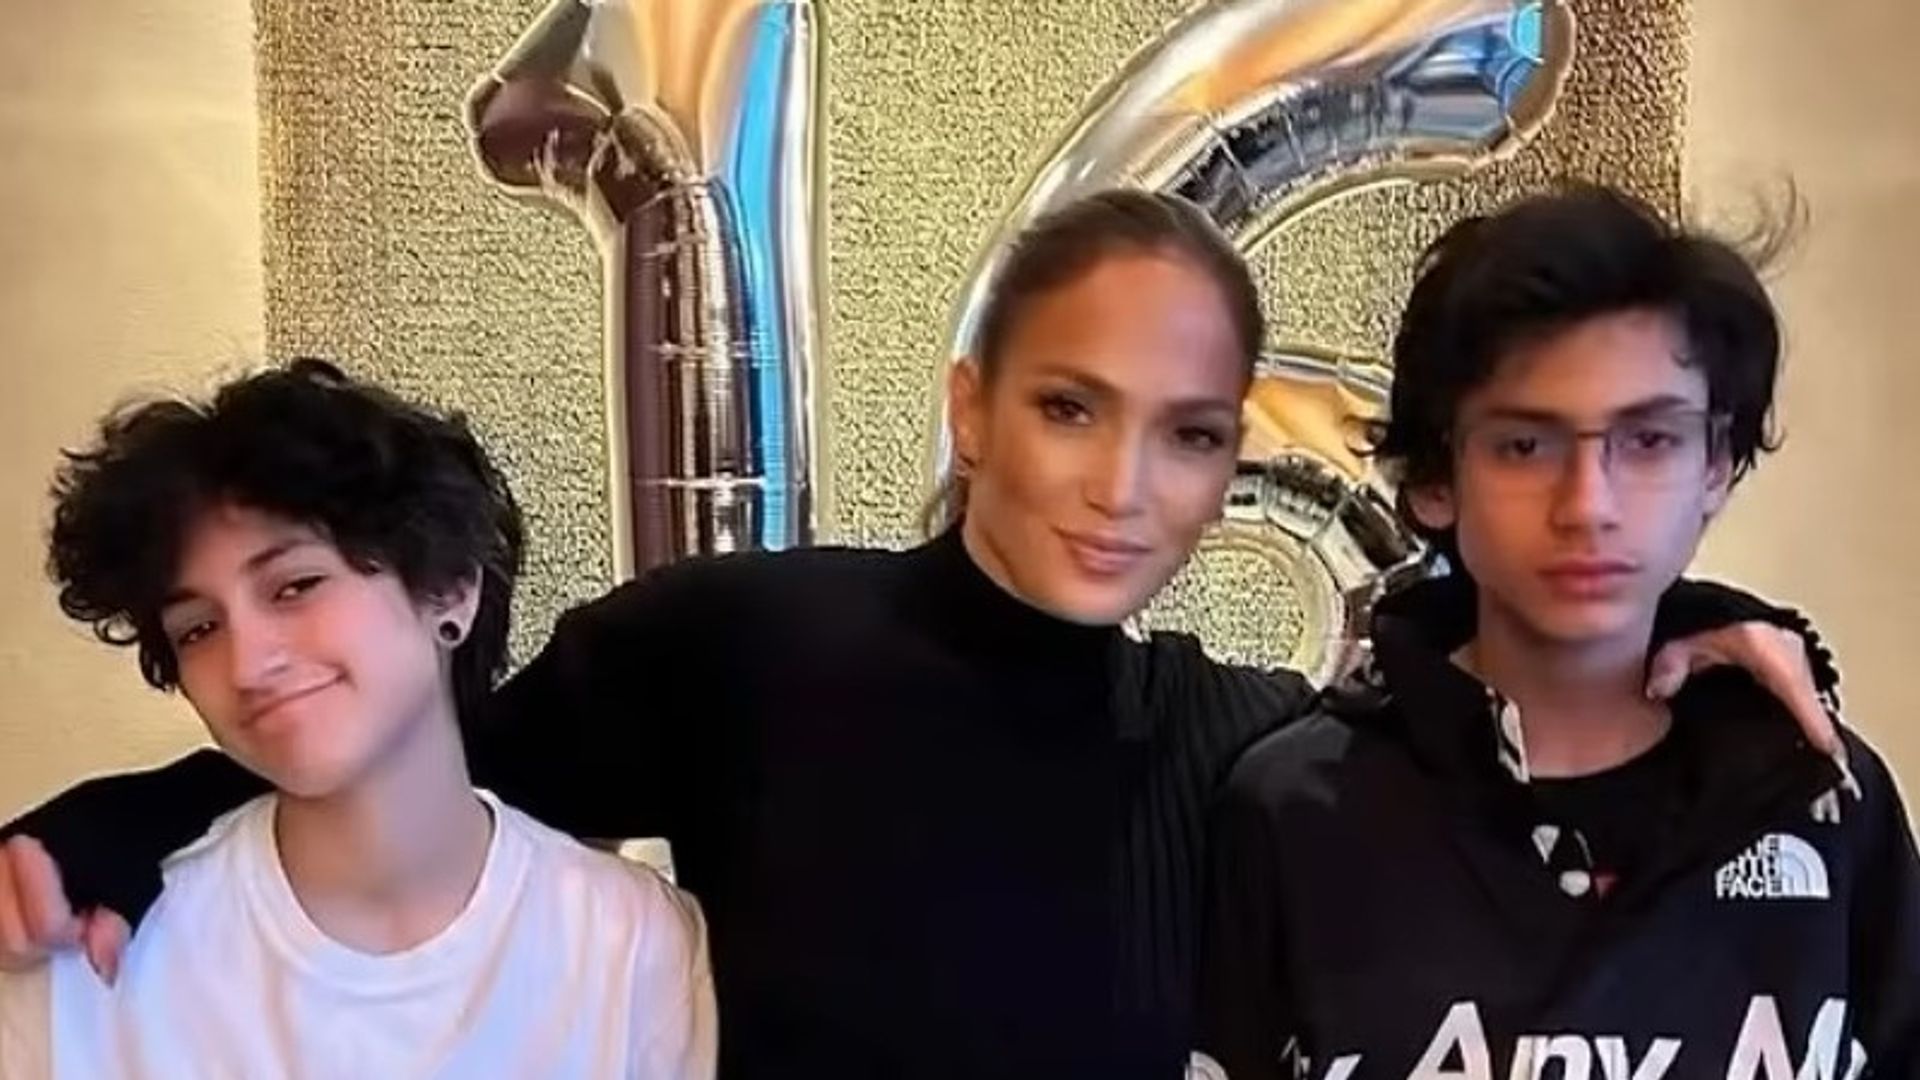 Jennifer Lopez's twins Emme and Max have the most adorable baby brother as Marc Anthony shares new family photo